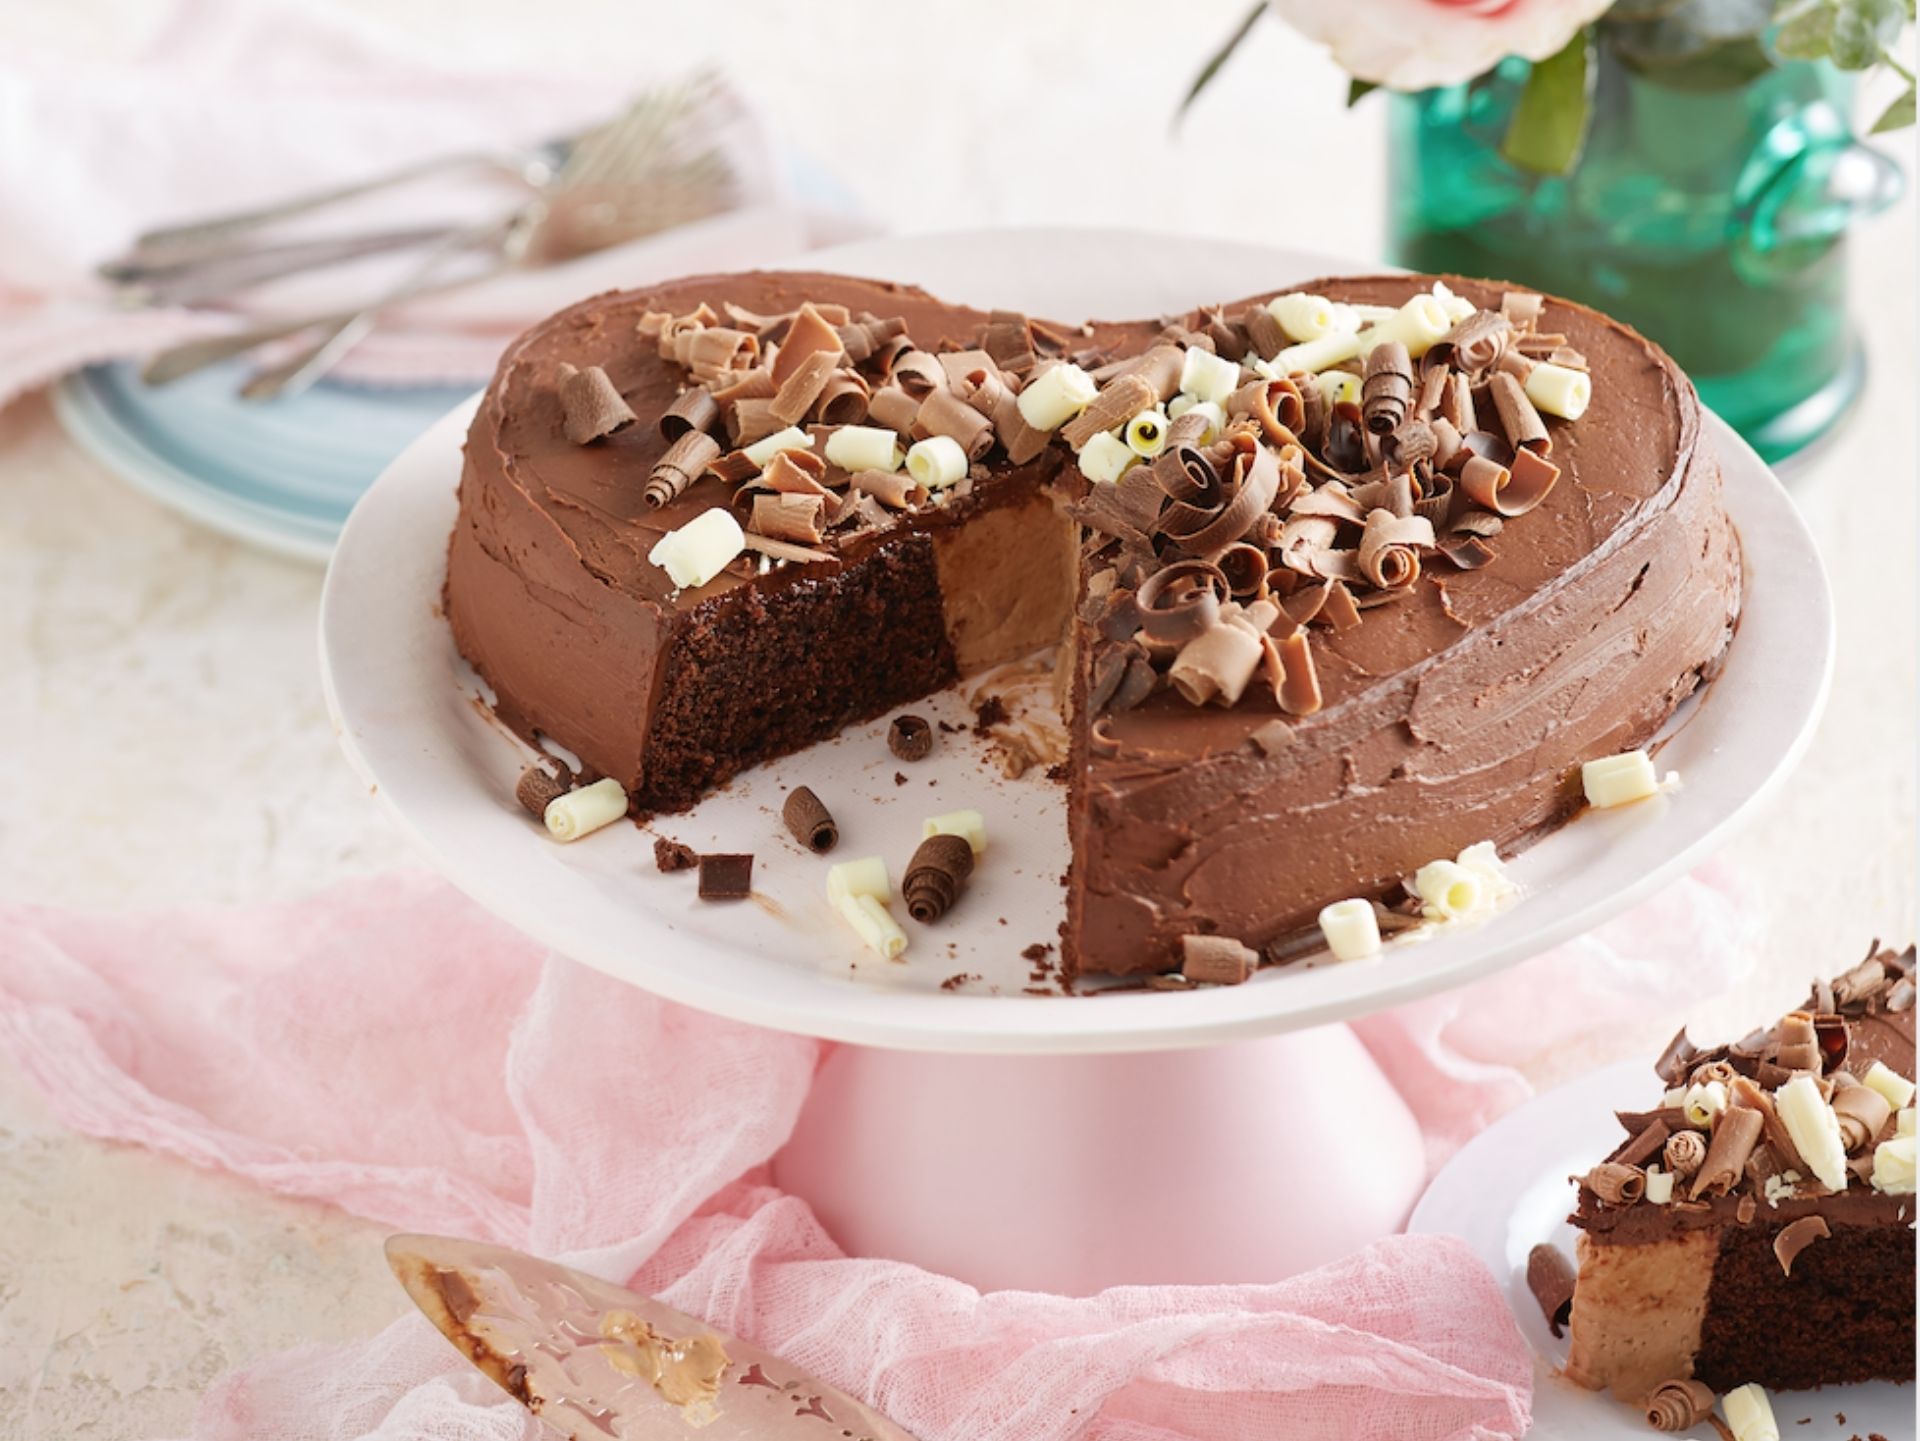 Chocolate mousse cake Recipe | Better Homes and Gardens